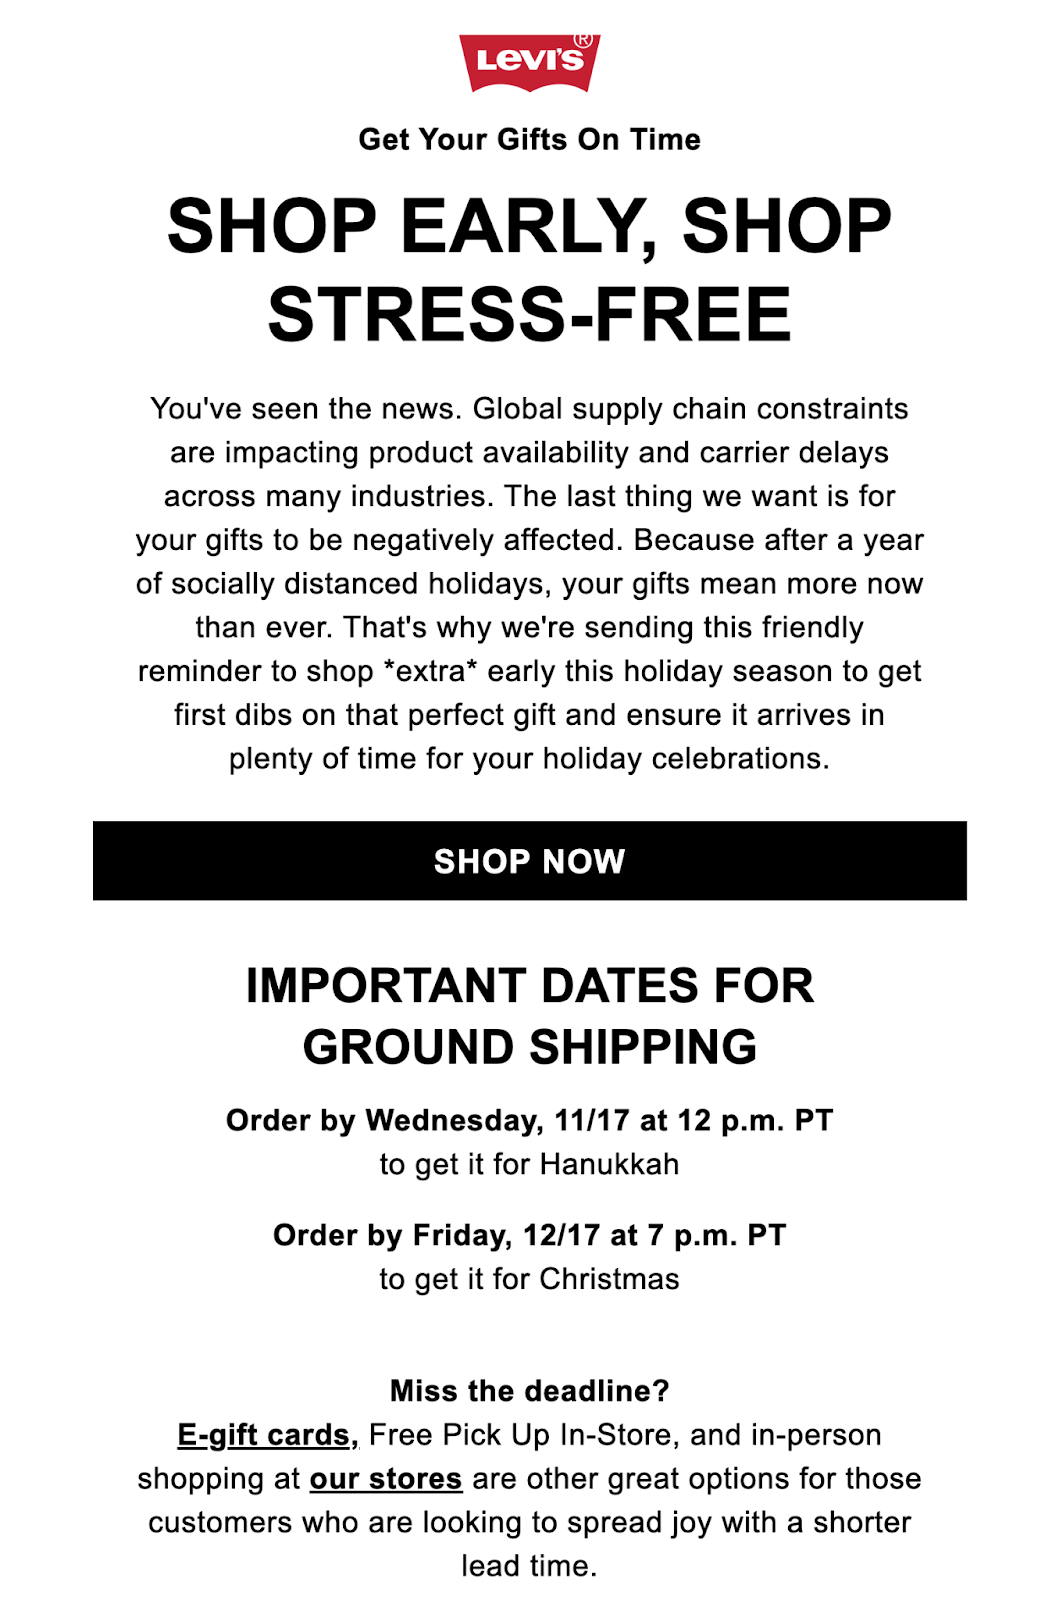 Levis email